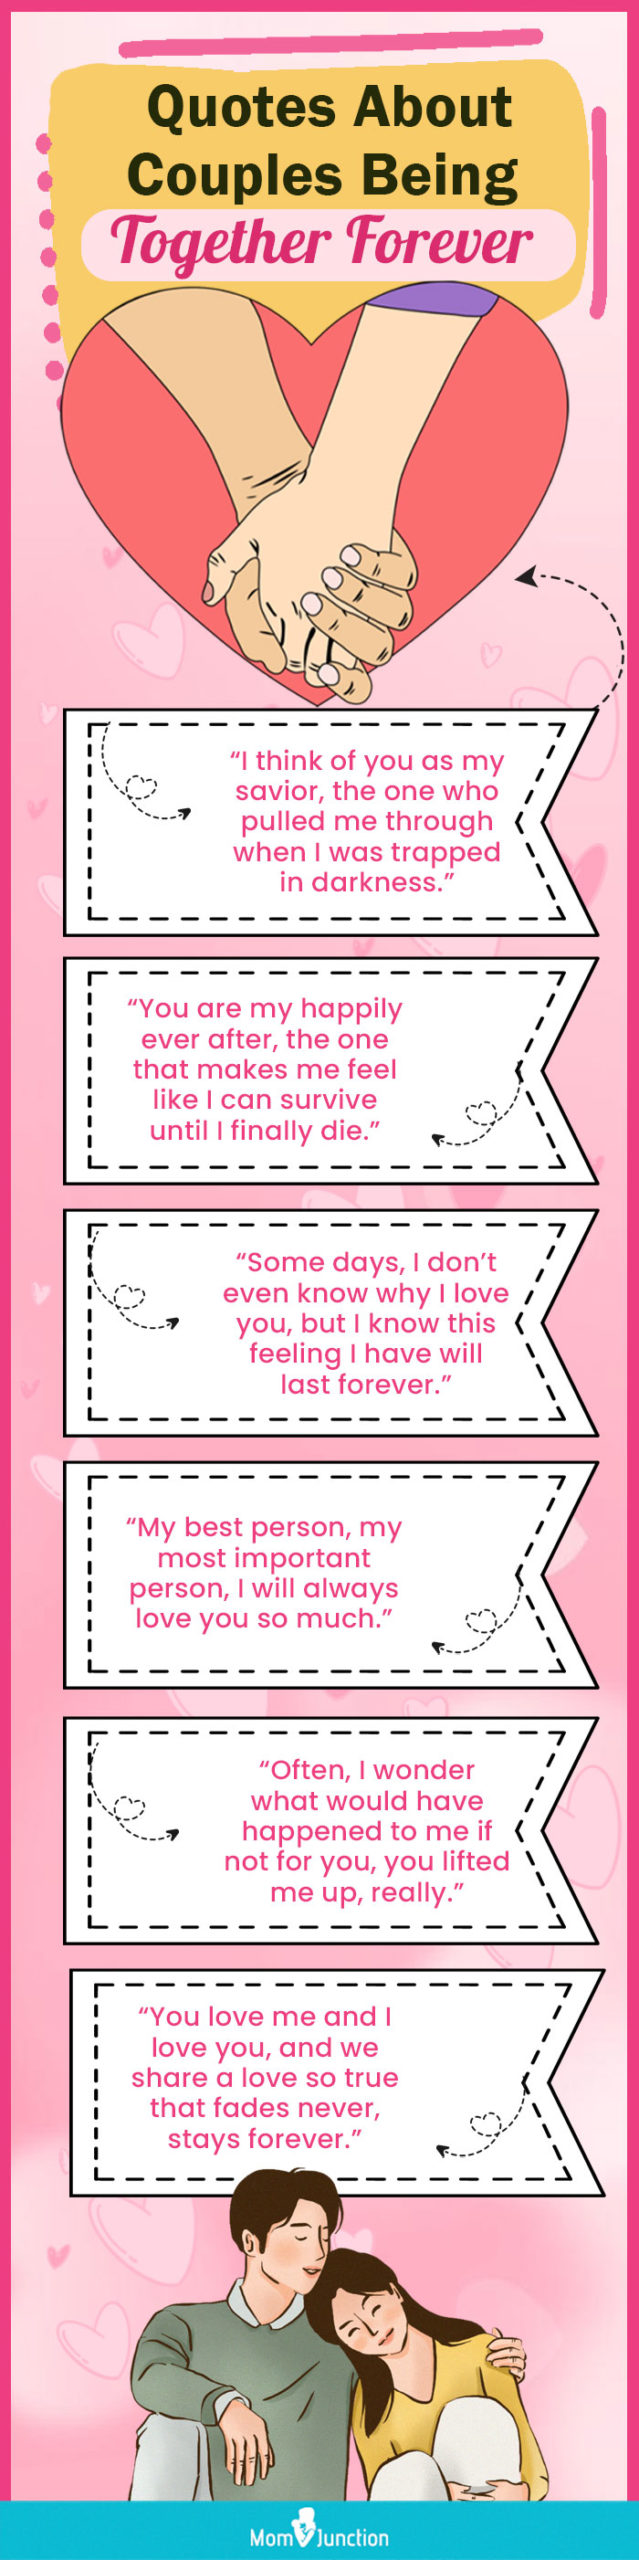 quotes about couples being together forever [infographic]